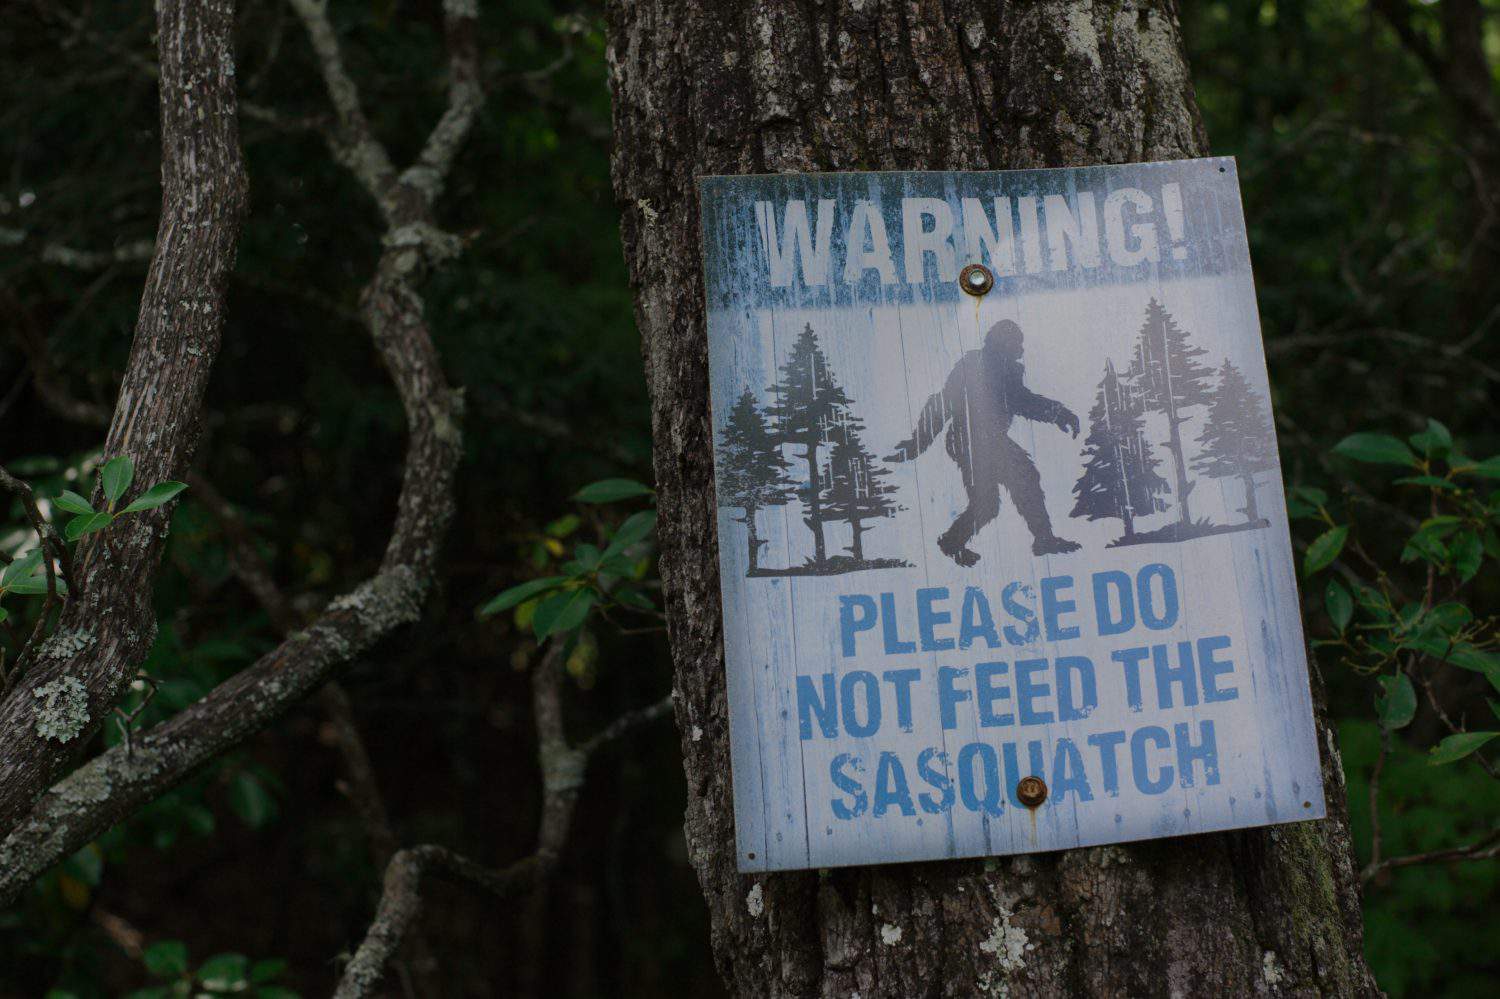 Sasquatch warning sign attached to a tree in the woods. Blue and black sign. Please do not feed.